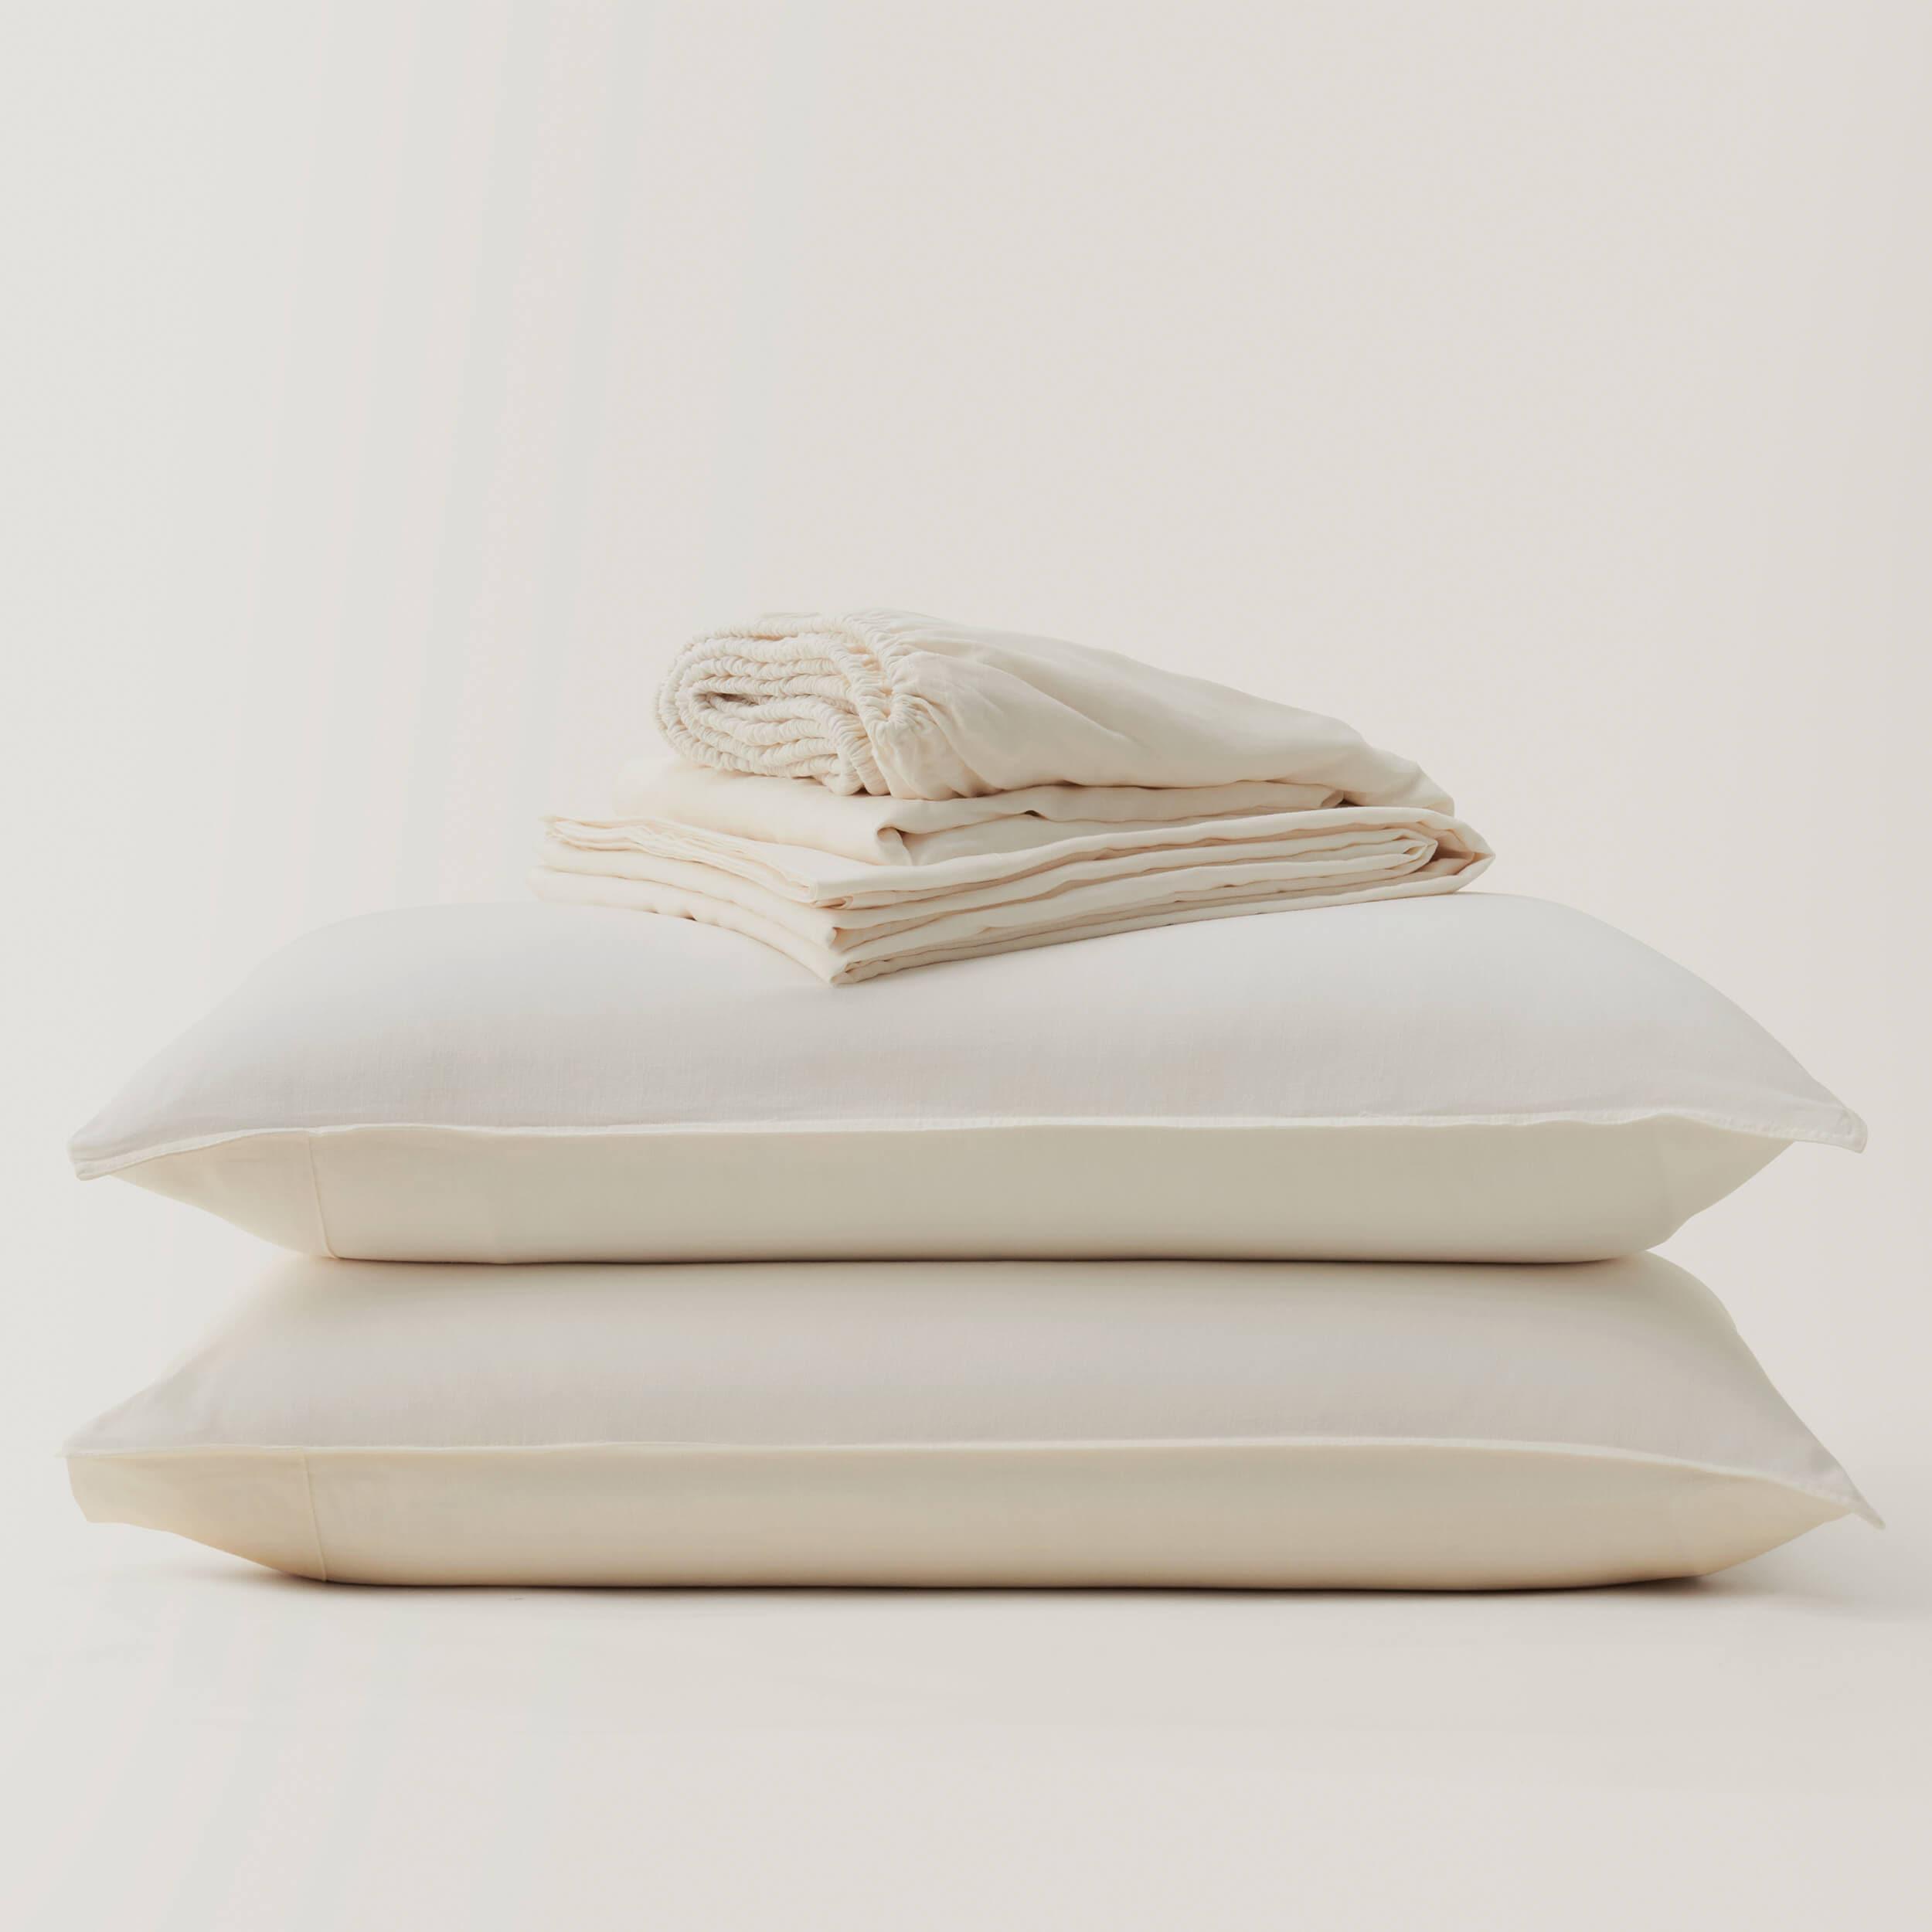 Restyle your bed with a luxurious Linen Lyocell Sheet Set in California King size.